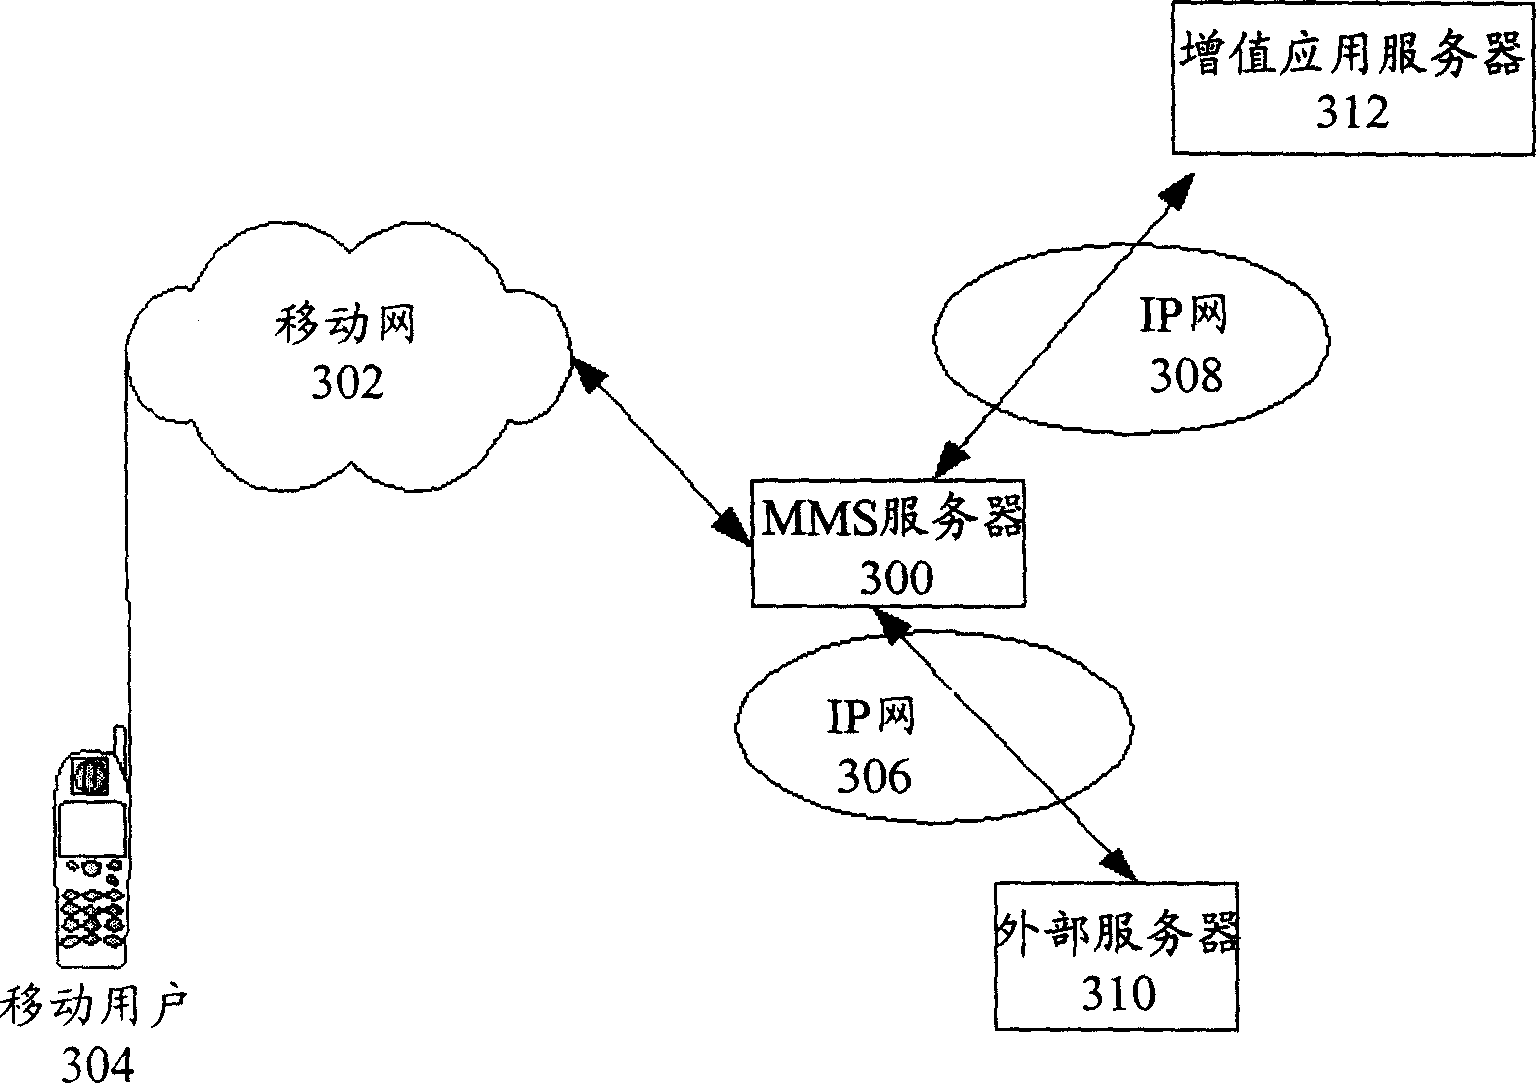 Method and system for receiving, transmitting and processing electronic message in mobile network